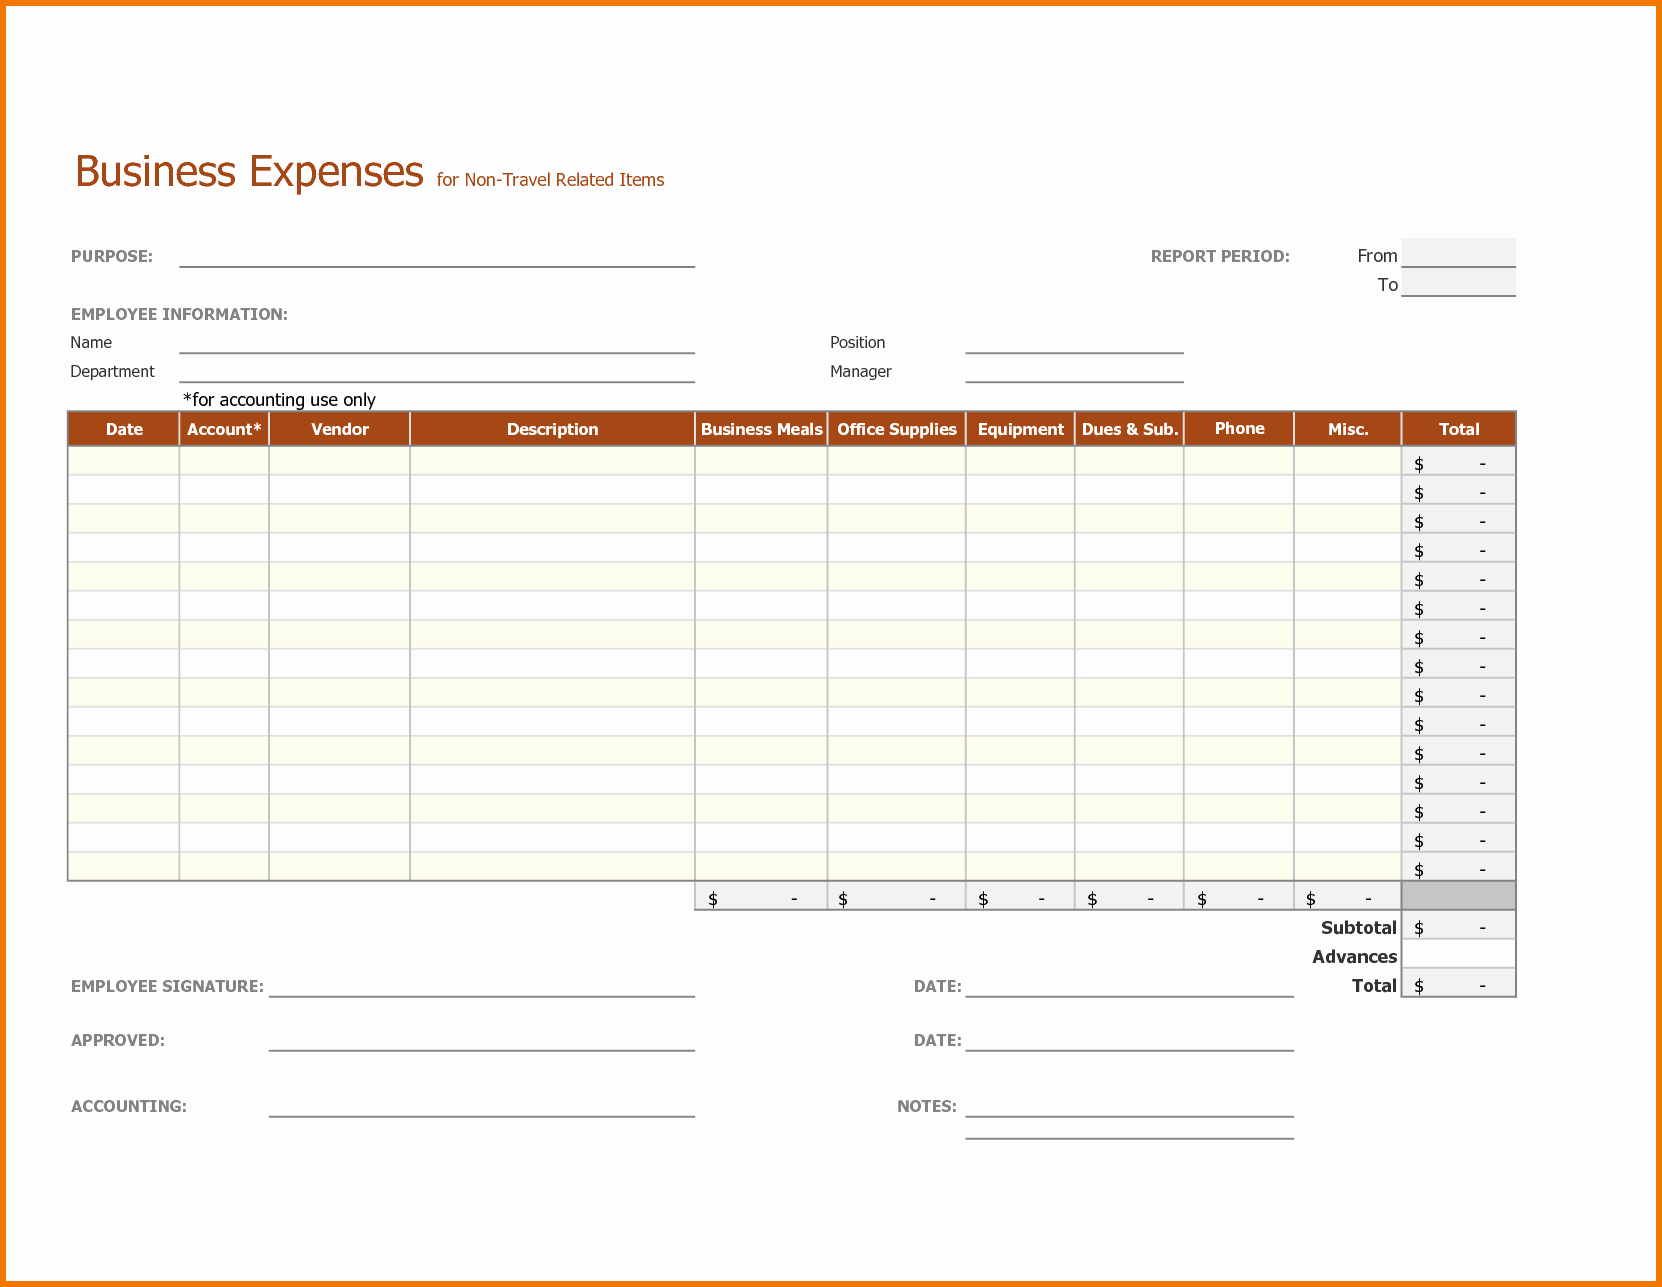 Business Expense Report Template Luxury Free Excel Templates for Monthly Expenses 1000 Ideas